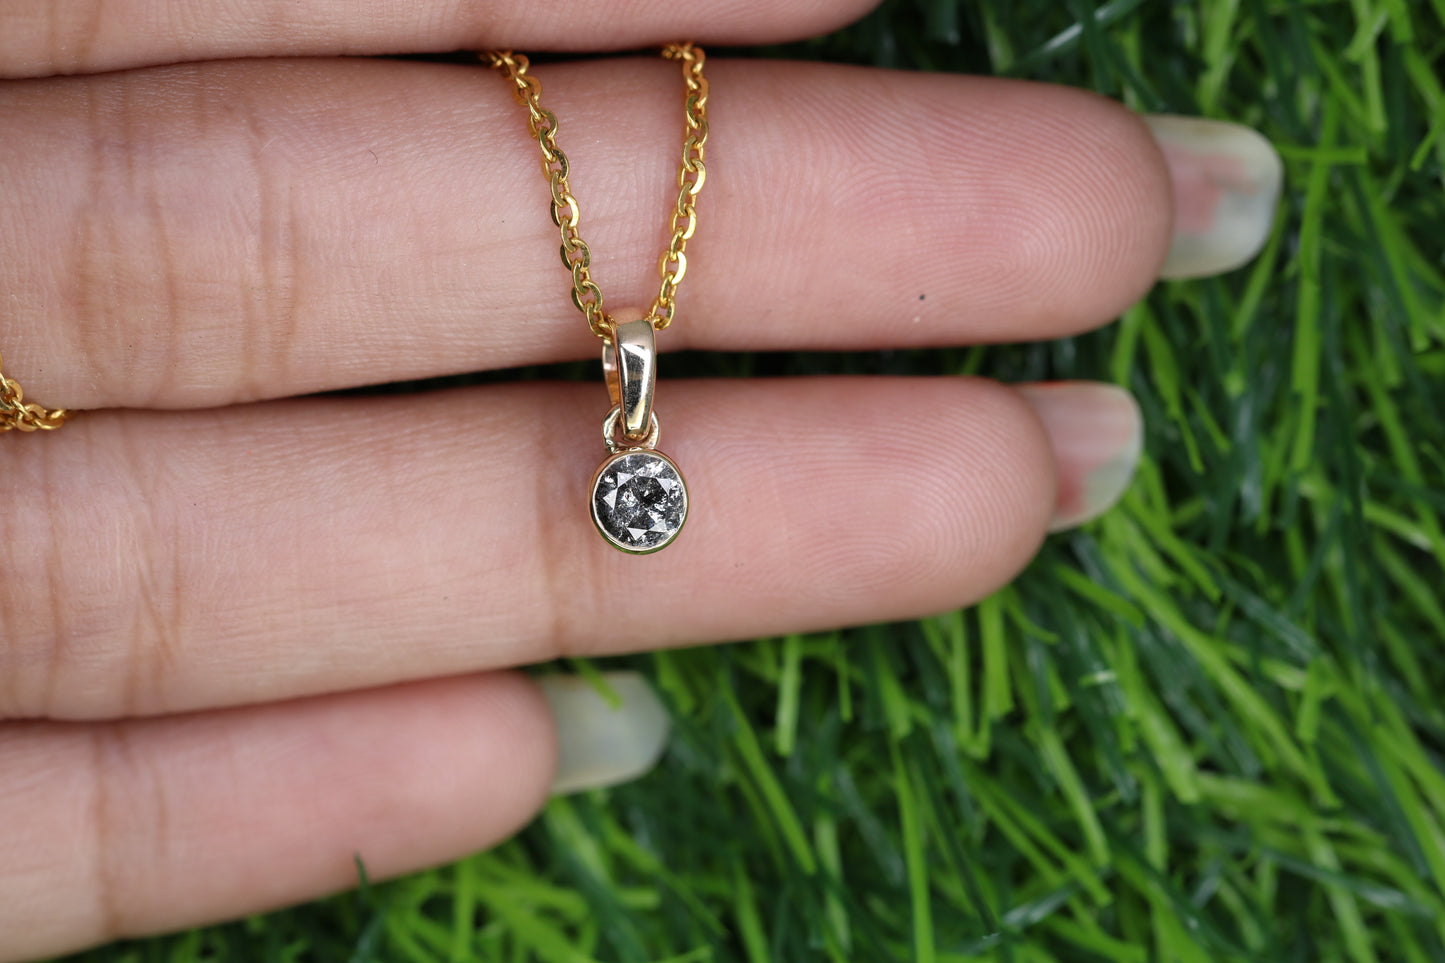 Salt And Pepper Round Brilliant Cut Diamond Pendant Bezel Setting With 10K Gold Chain Necklace For Women